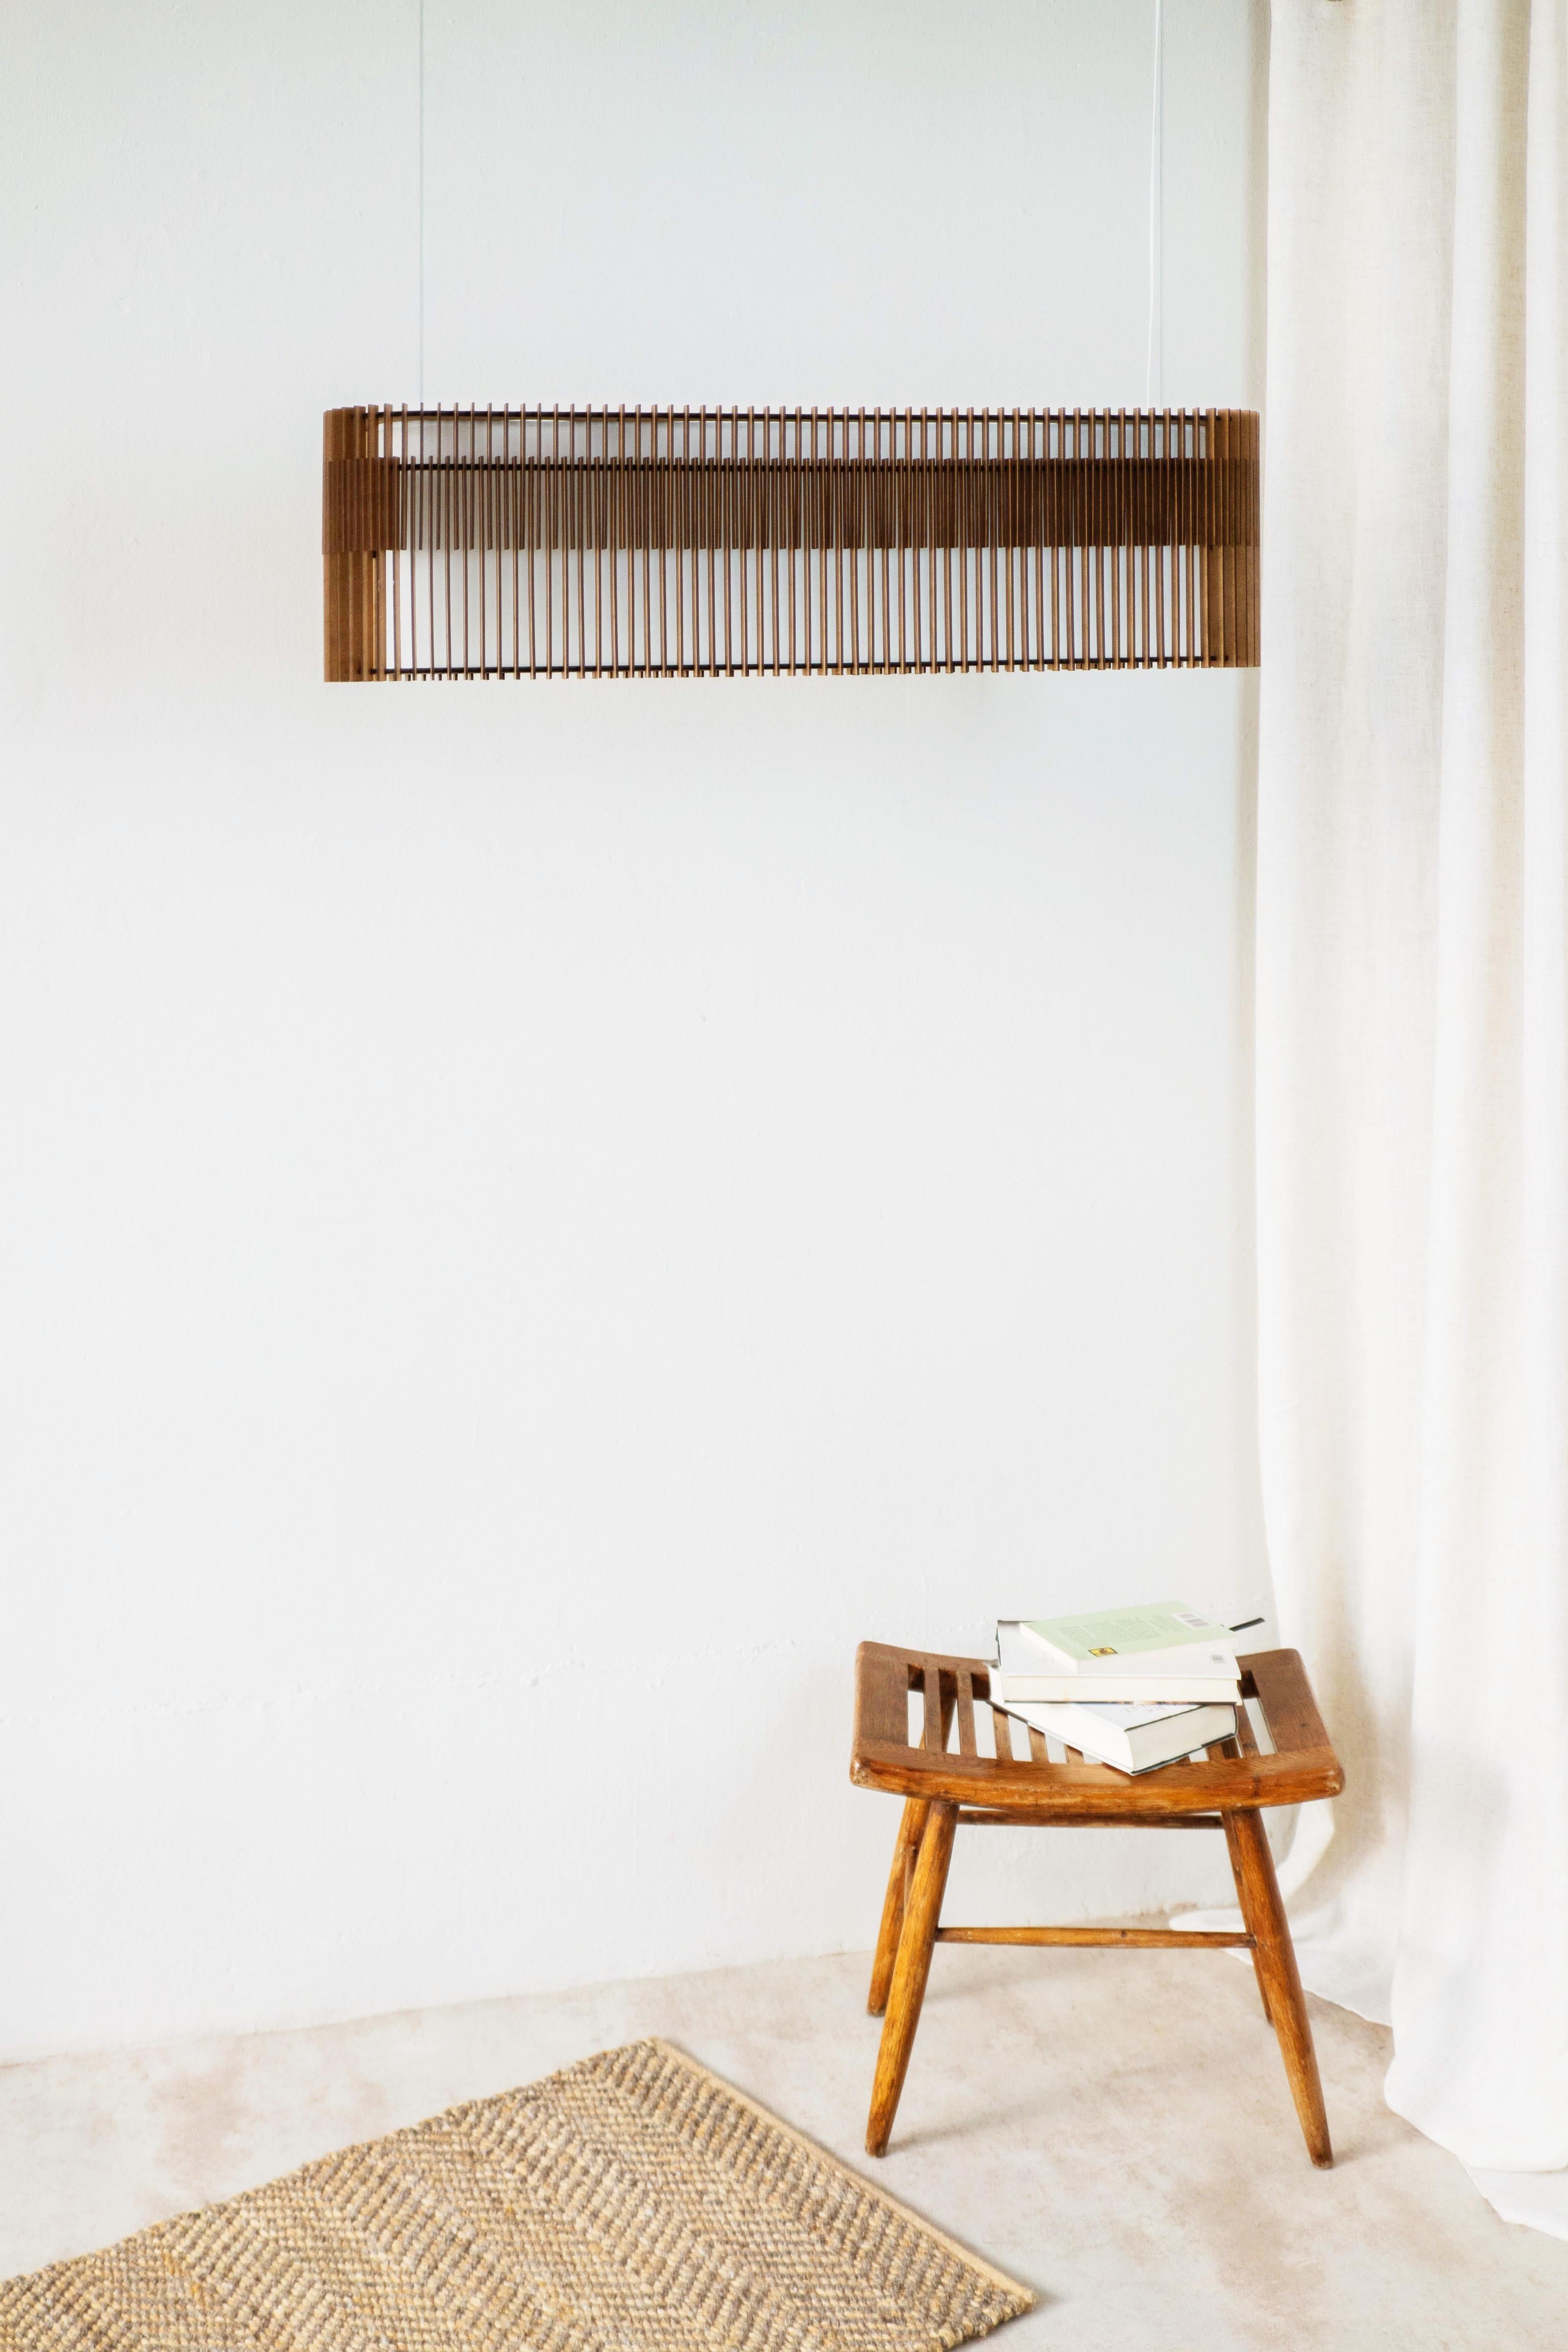 SUAU lamps are designed and manufactured by Mediterranean Objects in Barcelona, Spain. 
They have an outer lampshade made of MDF wooden slats, laser cut and assembled one by one, creating two different visual textures, one more dense and the other